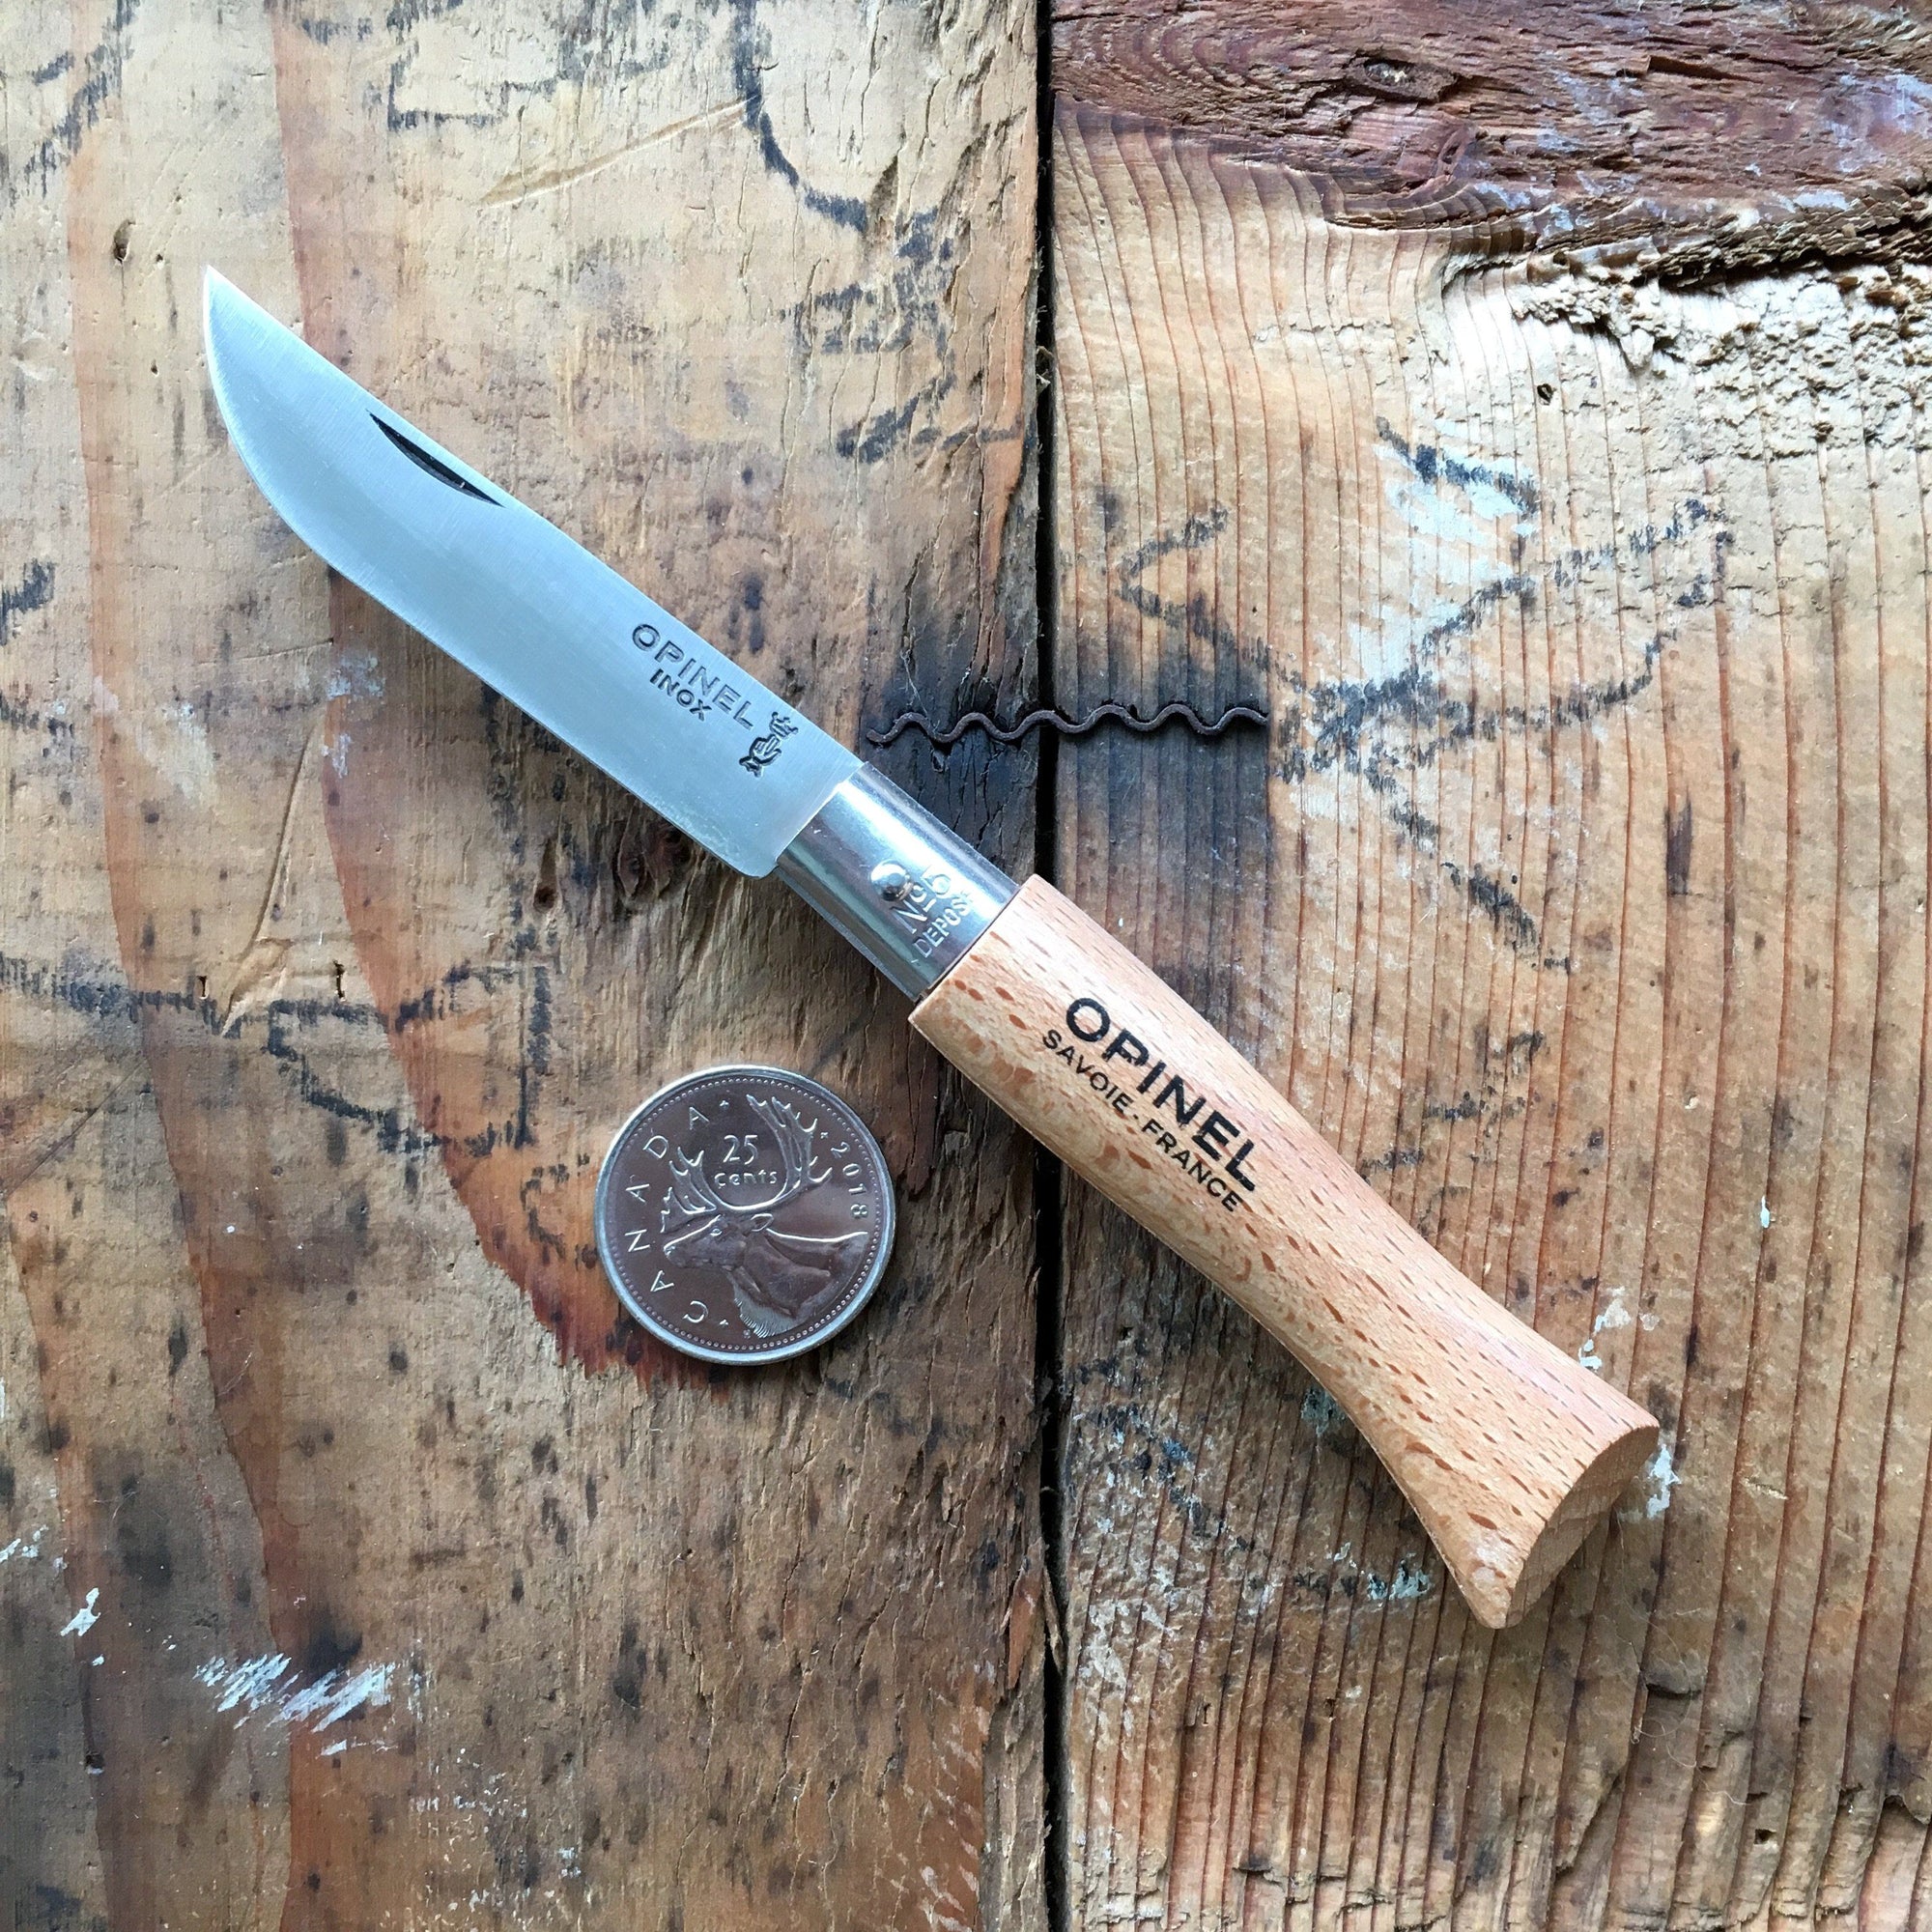  Opinel No. 07 Carbone - Carbon Steel Folding Pocket Knife,  Beechwood Handle, 3.07 in Blade, Virobloc Safety Locking Collar, Made in  France since 1890 : Sports & Outdoors